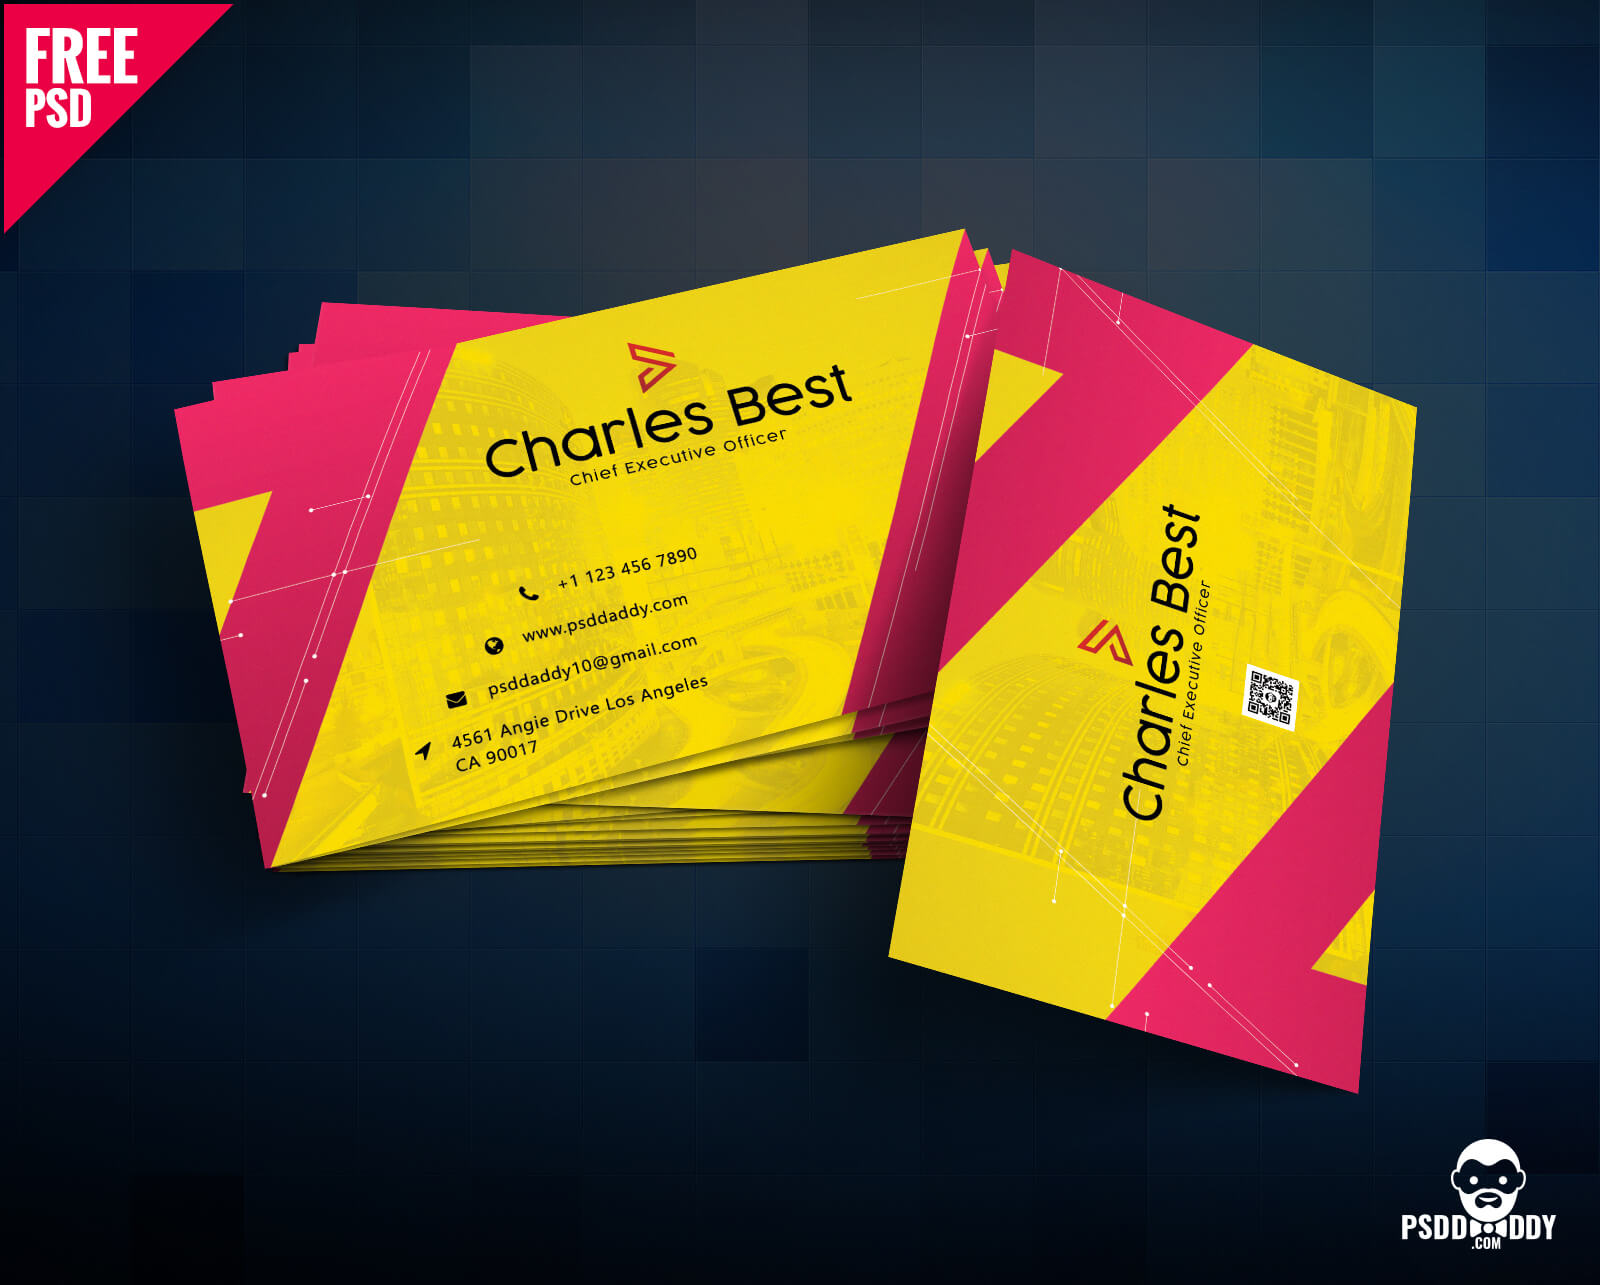 Download] Creative Business Card Free Psd | Psddaddy Regarding Visiting Card Template Psd Free Download